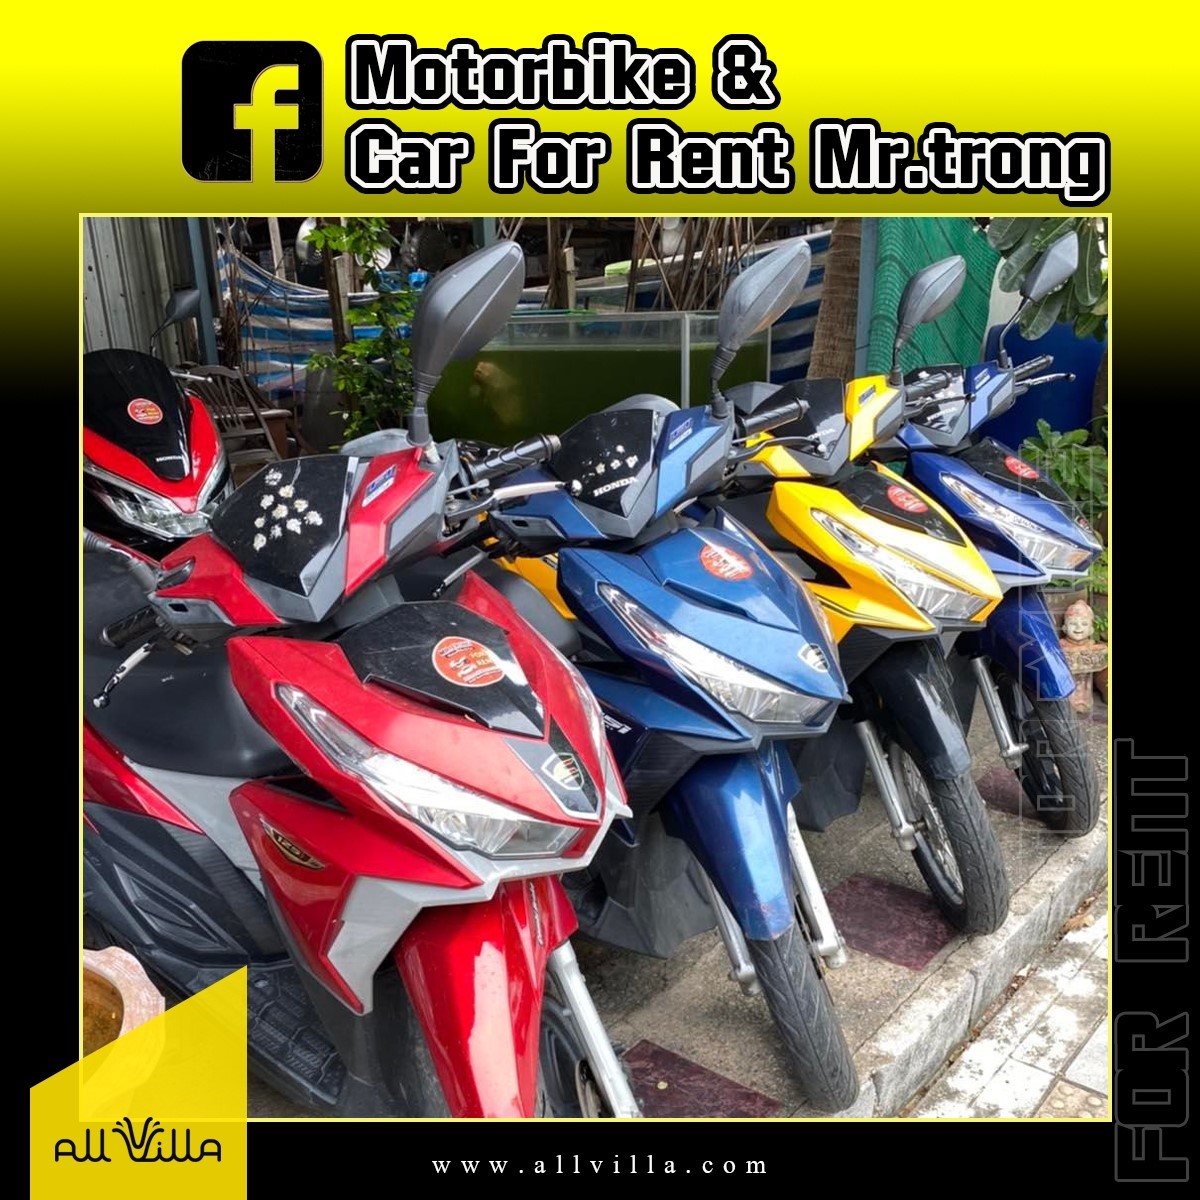 Motorbike & Car For Rent Mr.trong